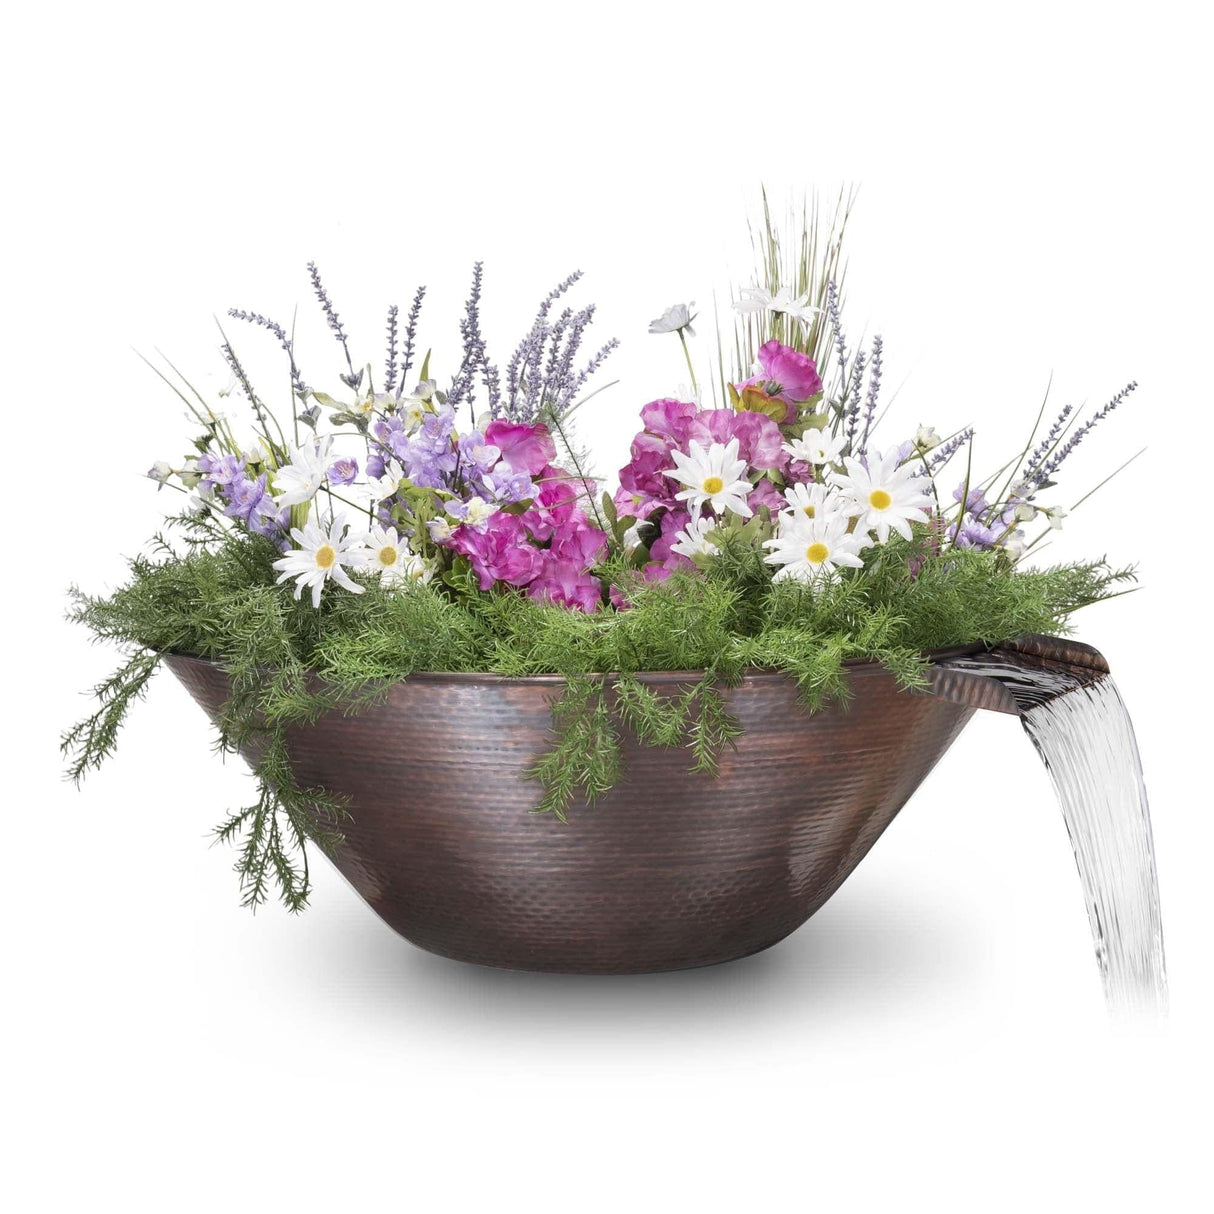 The Outdoor Plus Remi Planter and Water Bowl - Hammered Copper